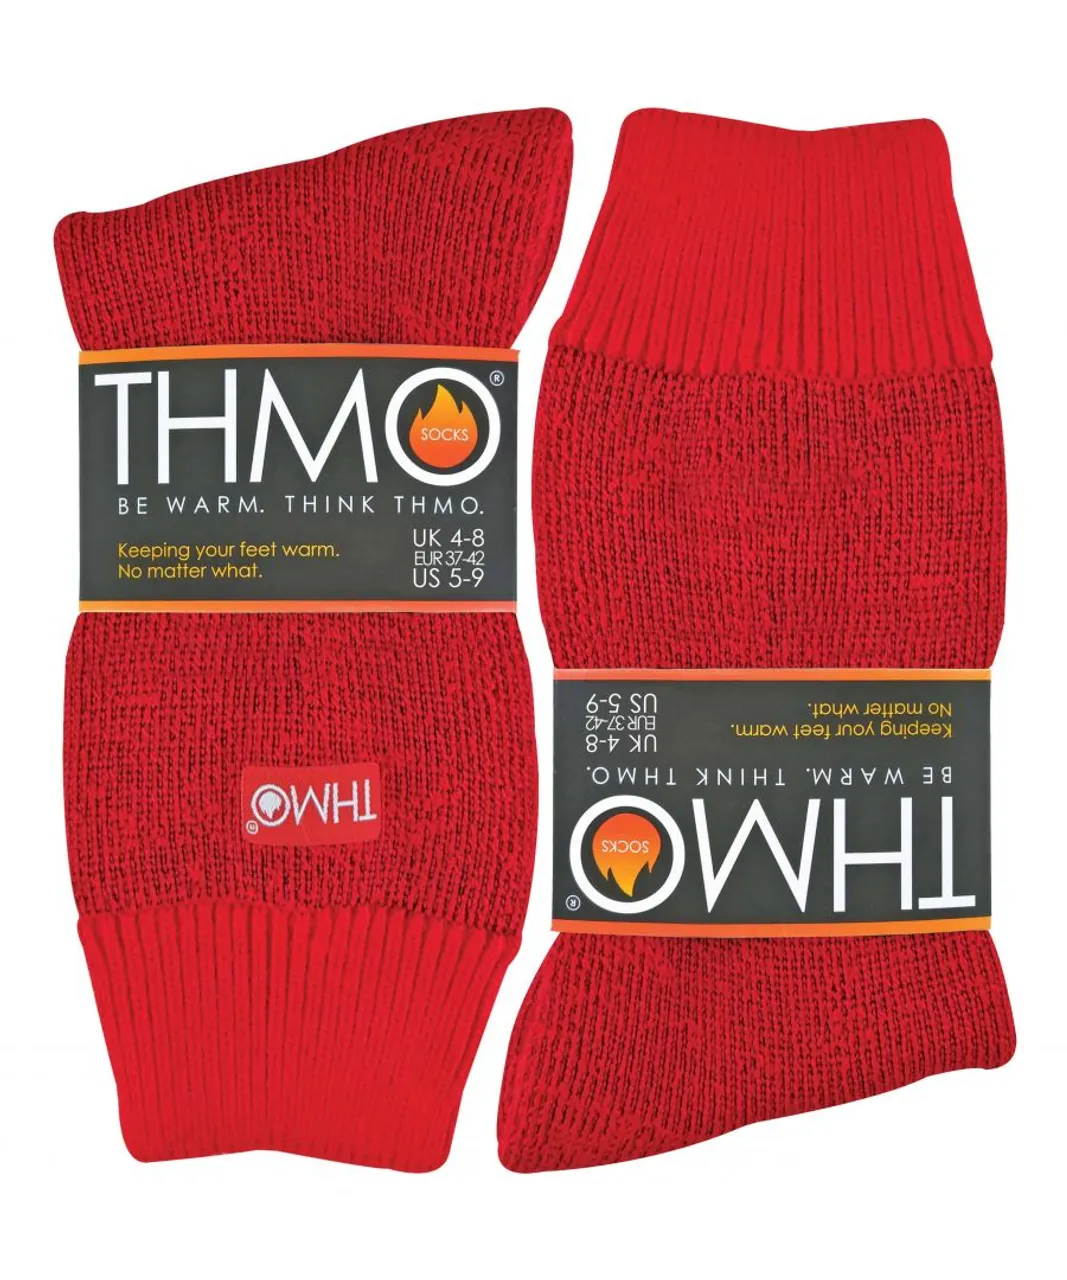 THMO Womens - 1 Pair Ladies Thick Fleece Lined Warm Thermal Socks for Winter - Red